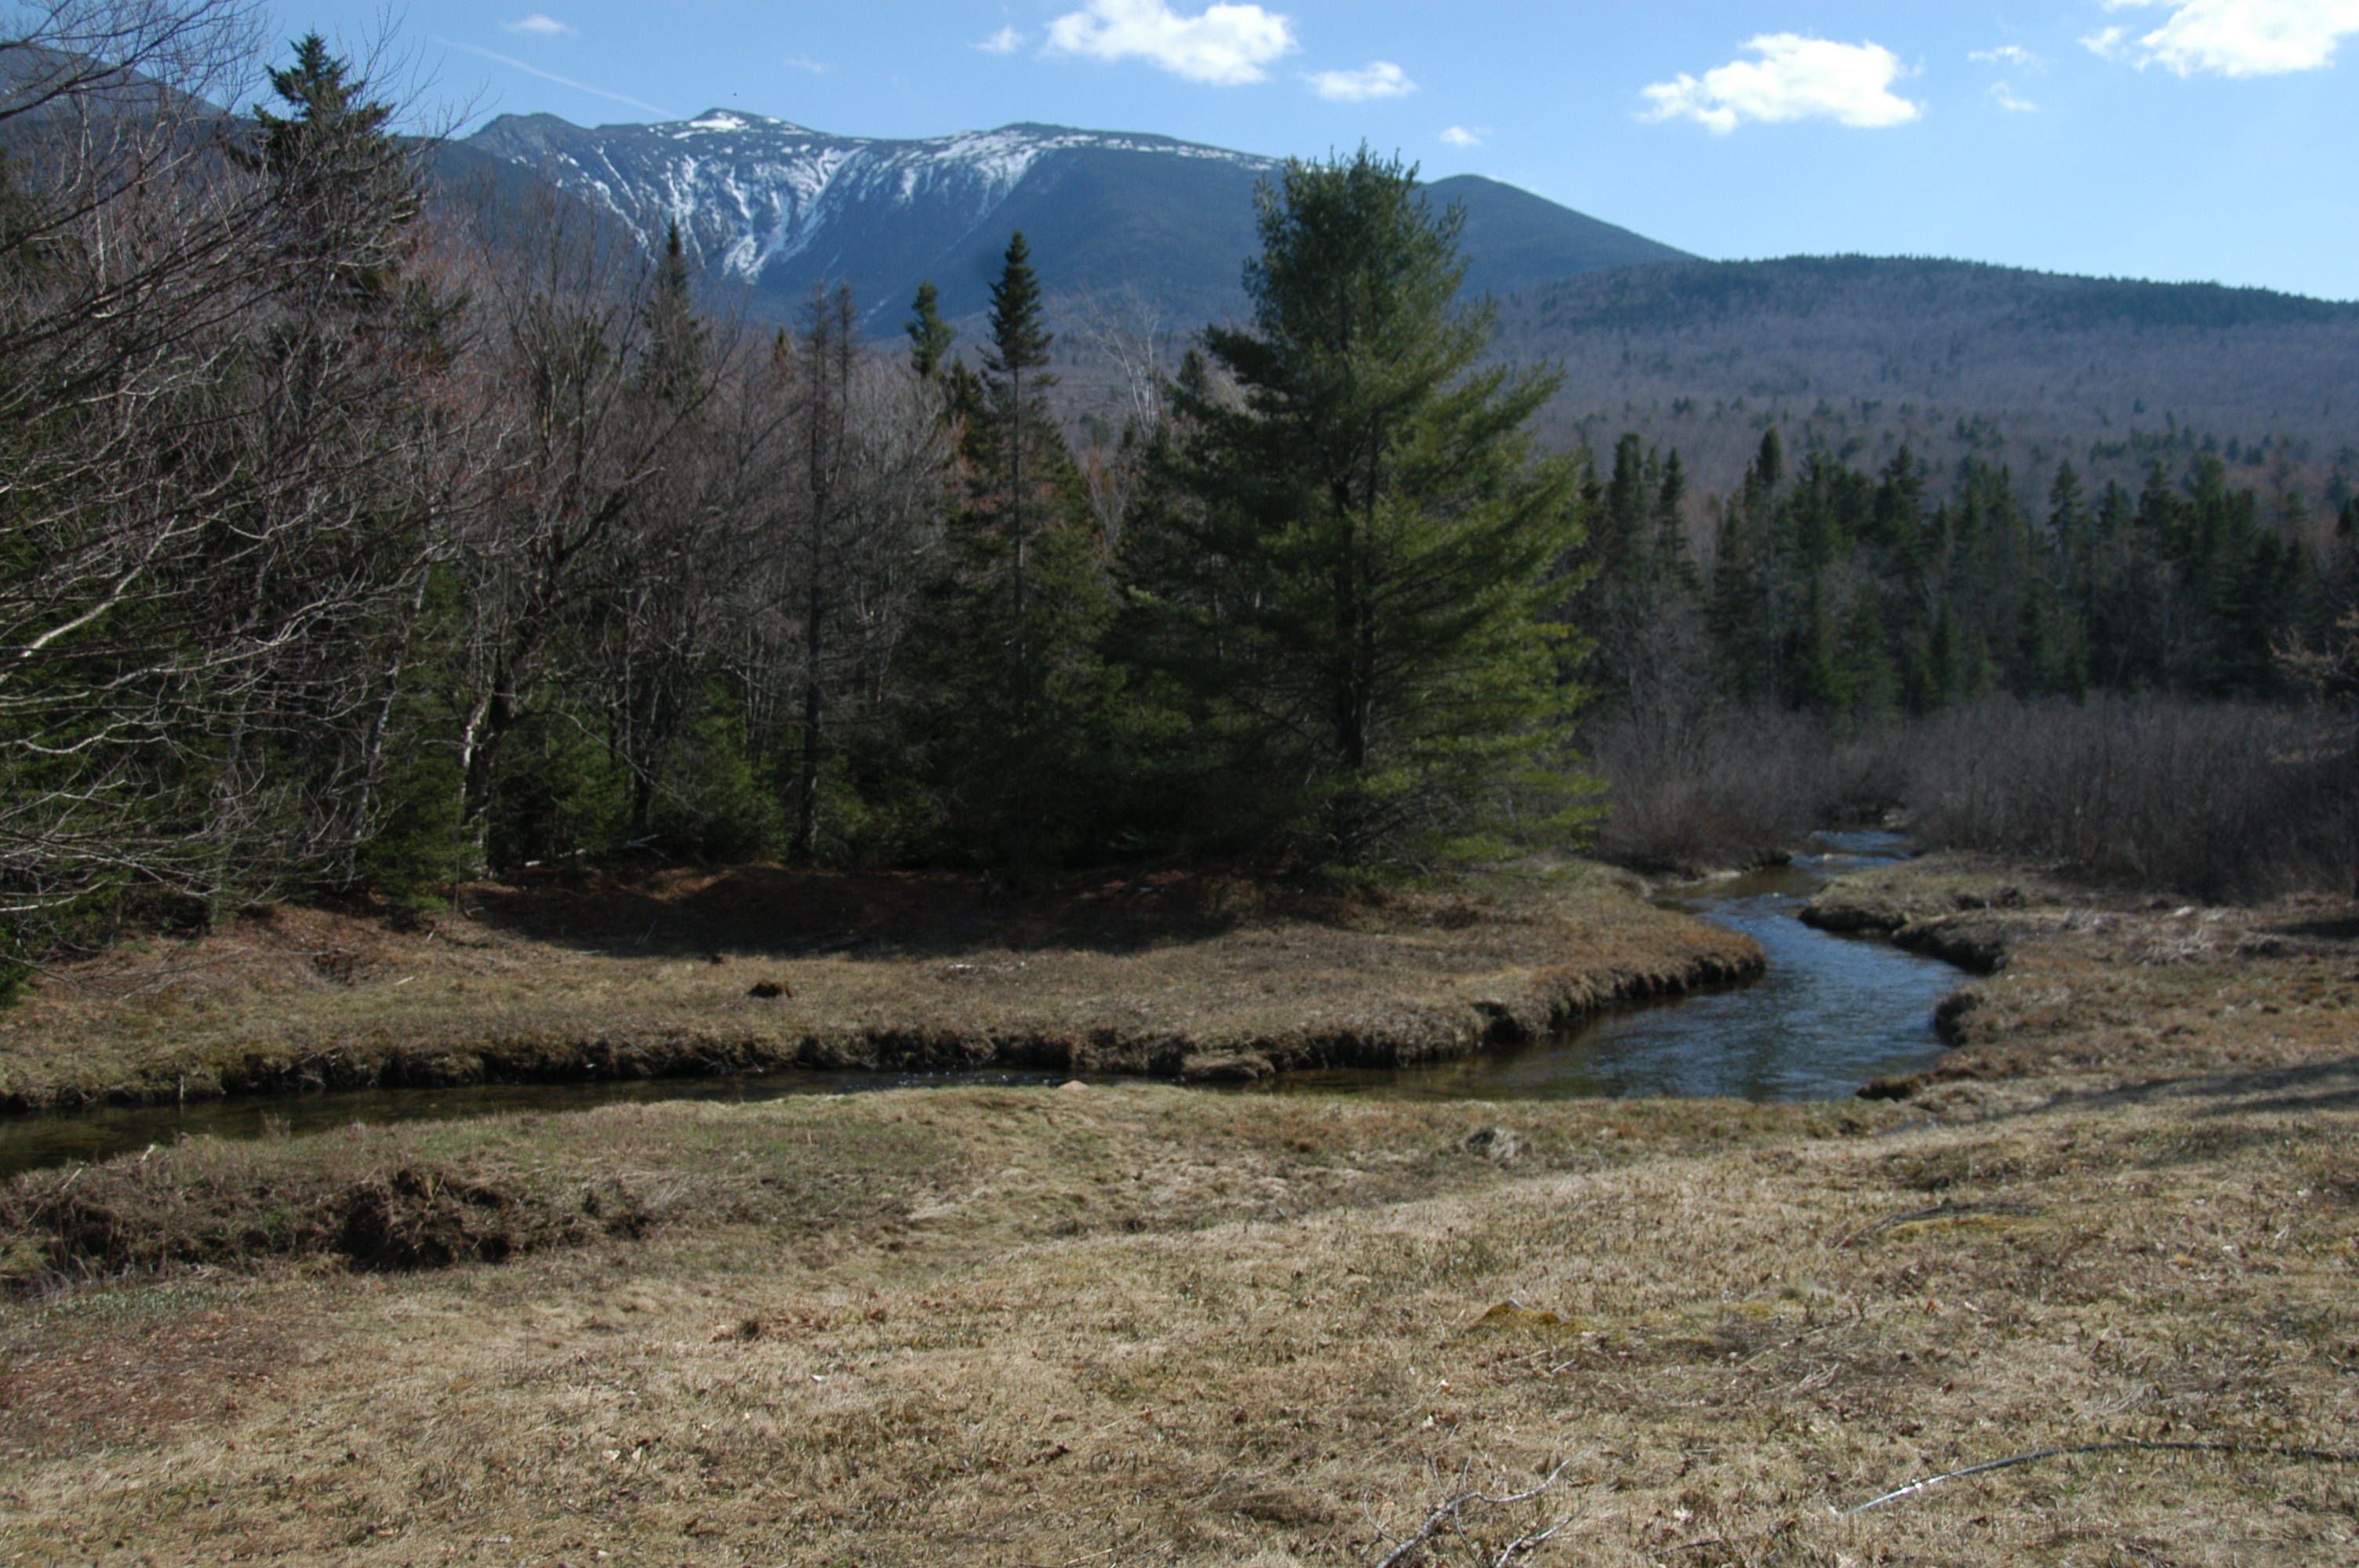 A photo of a river running towards a pine forest, in the background is a range of mountains, with snow capped peaks, under a blue sky. 